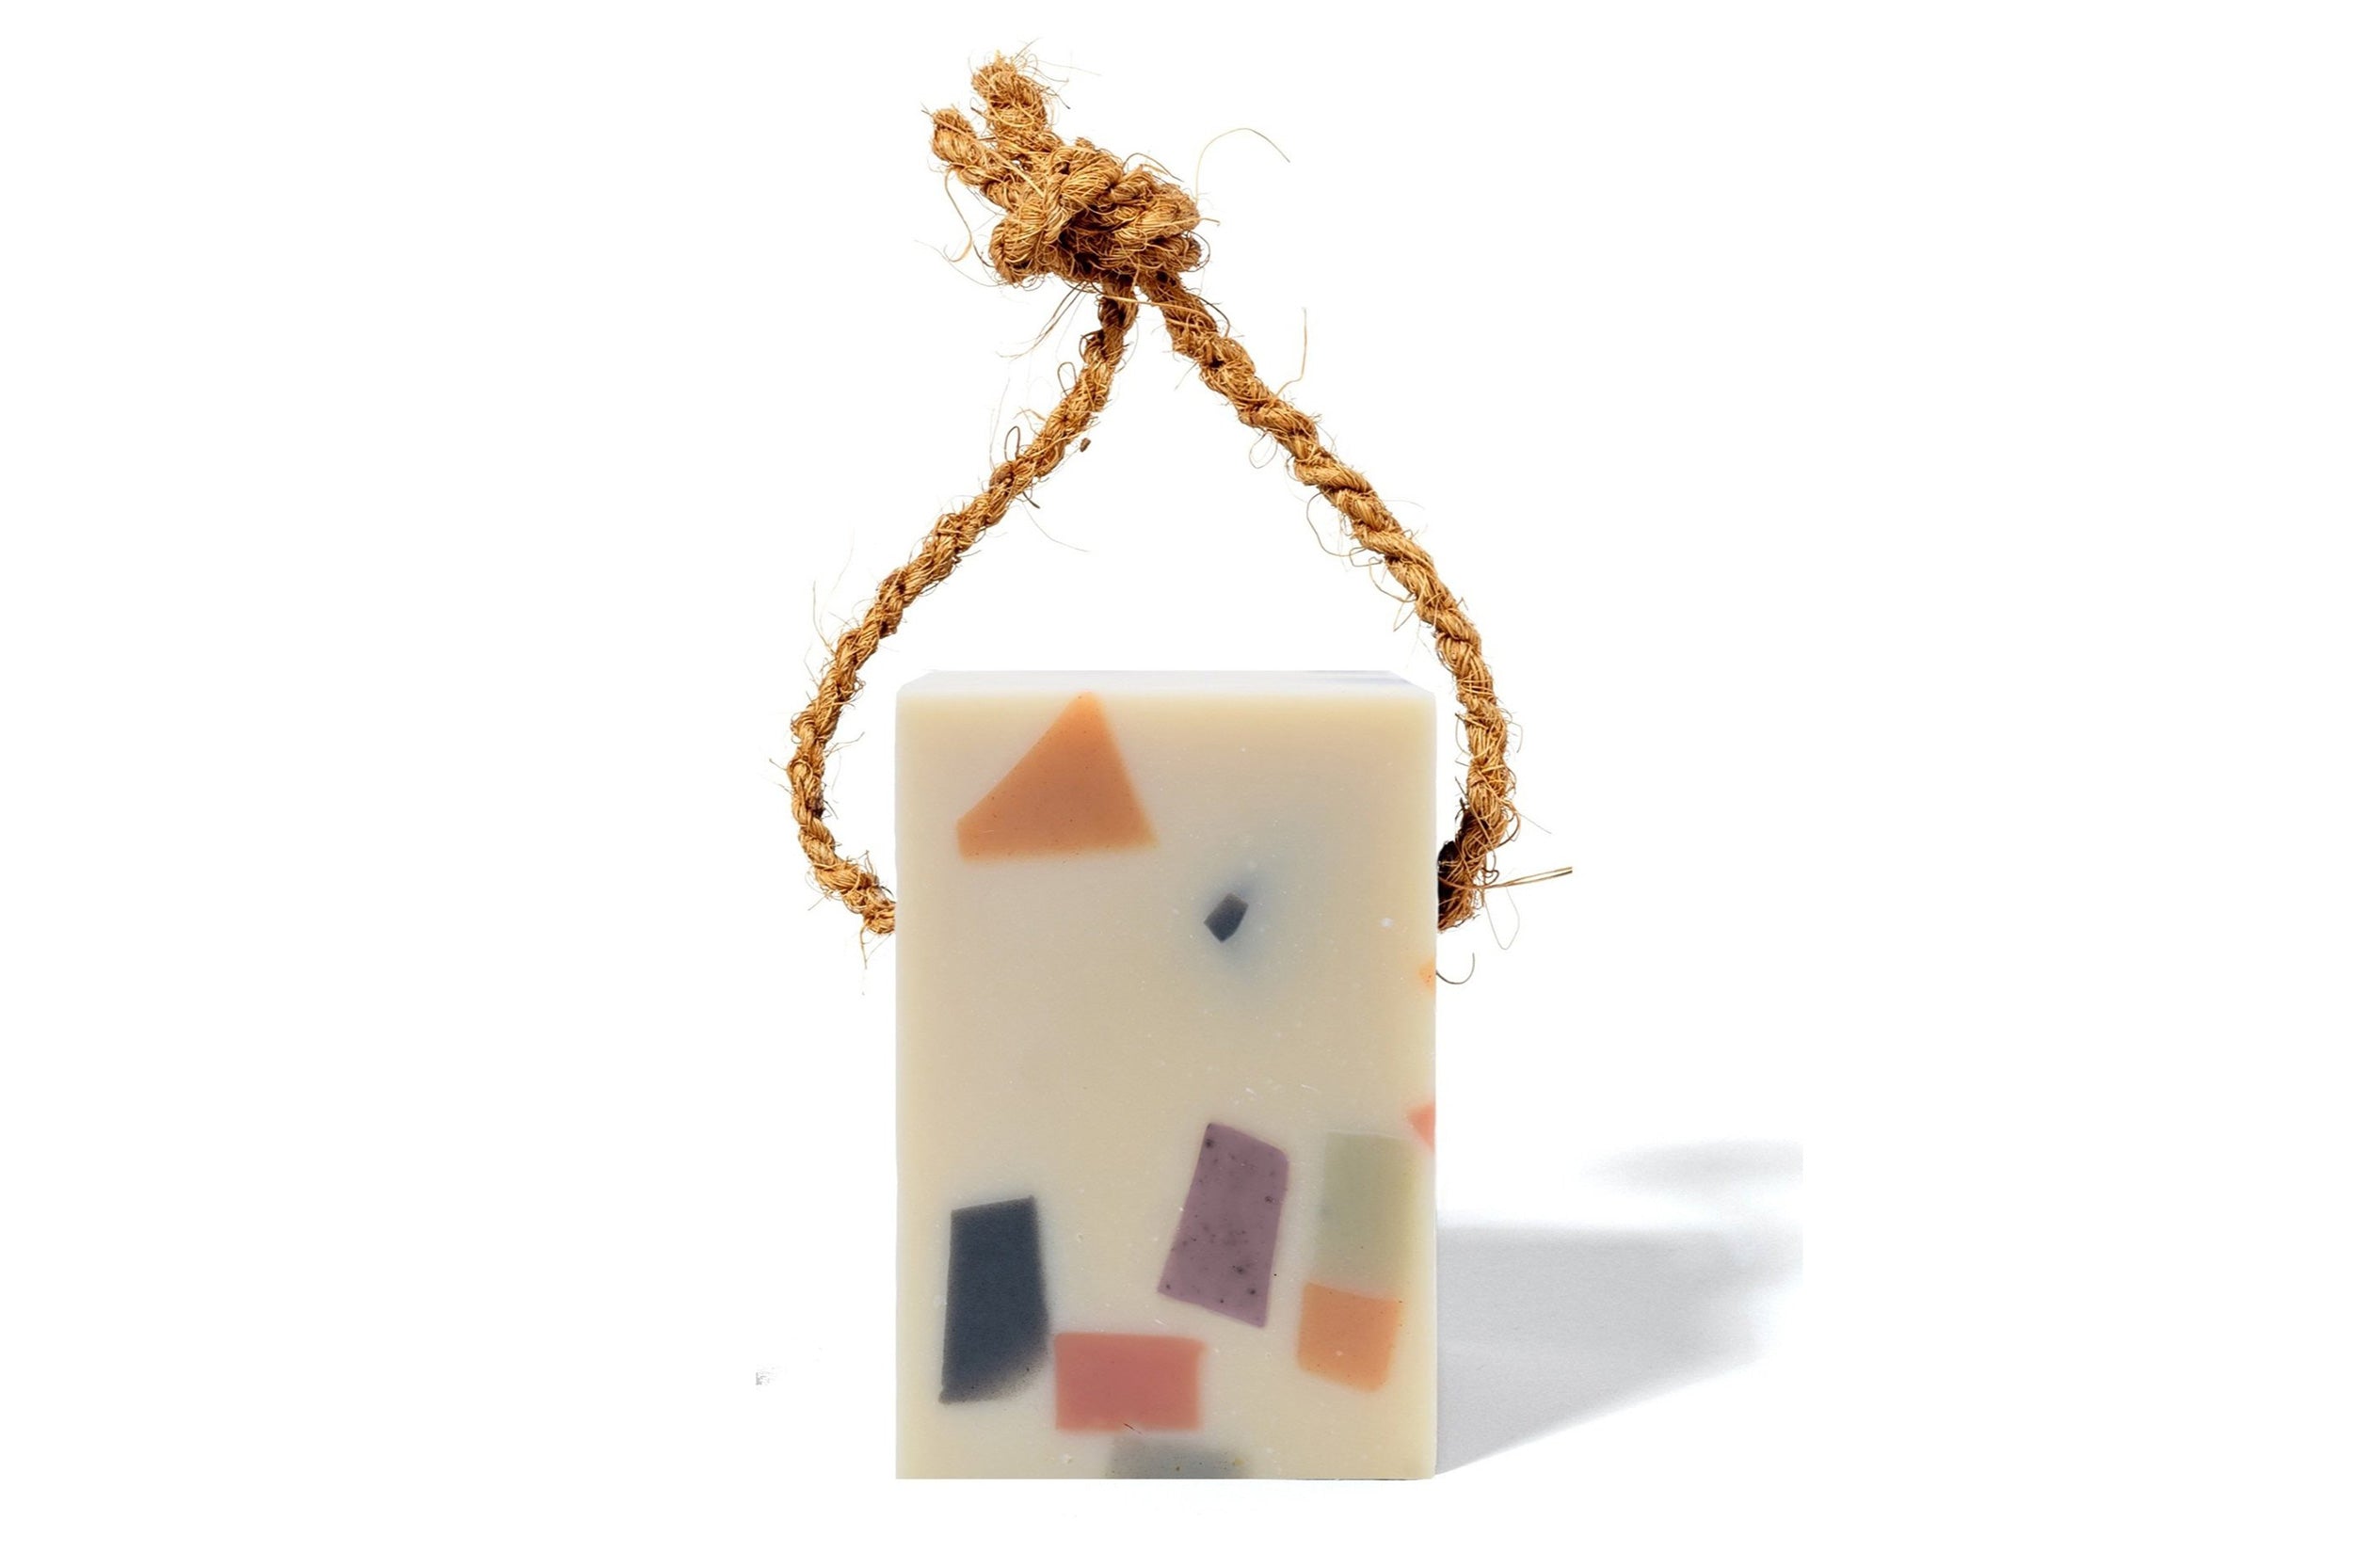 Mater Soap-Rope Soap